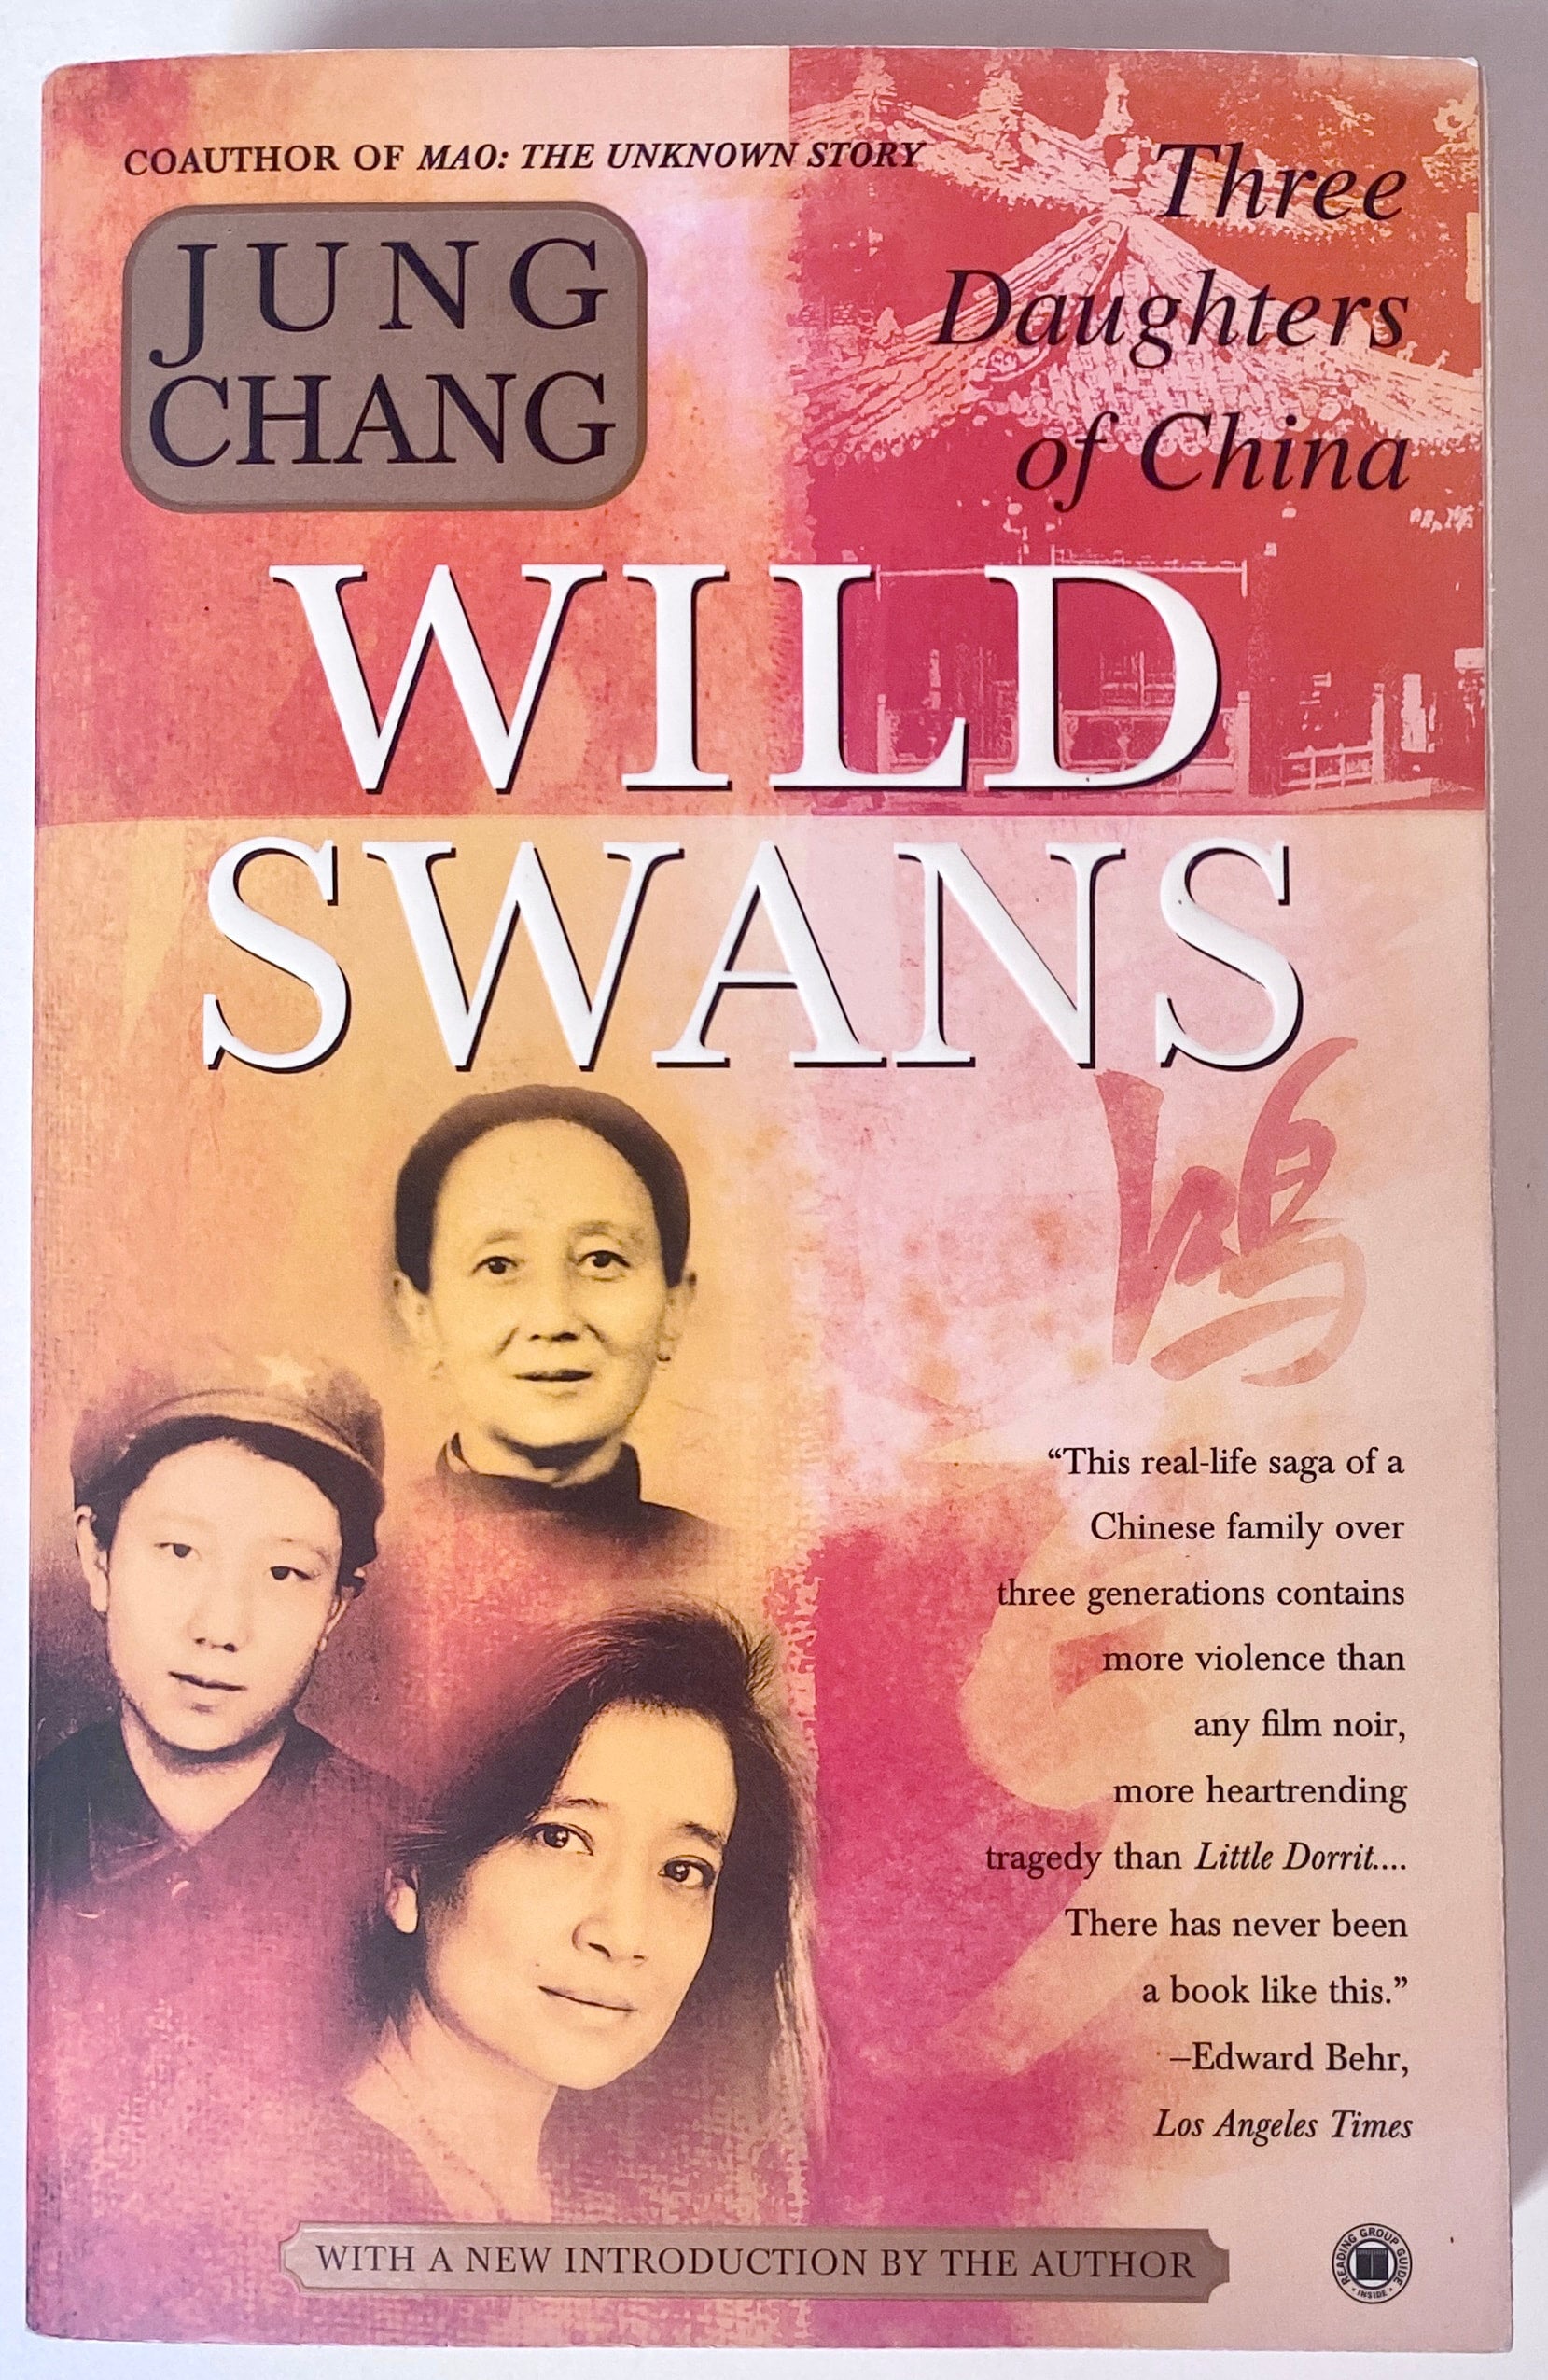 China　Chang,　Books　Three　of　Daughters　Swans:　Jung　Heritage　Wild　by